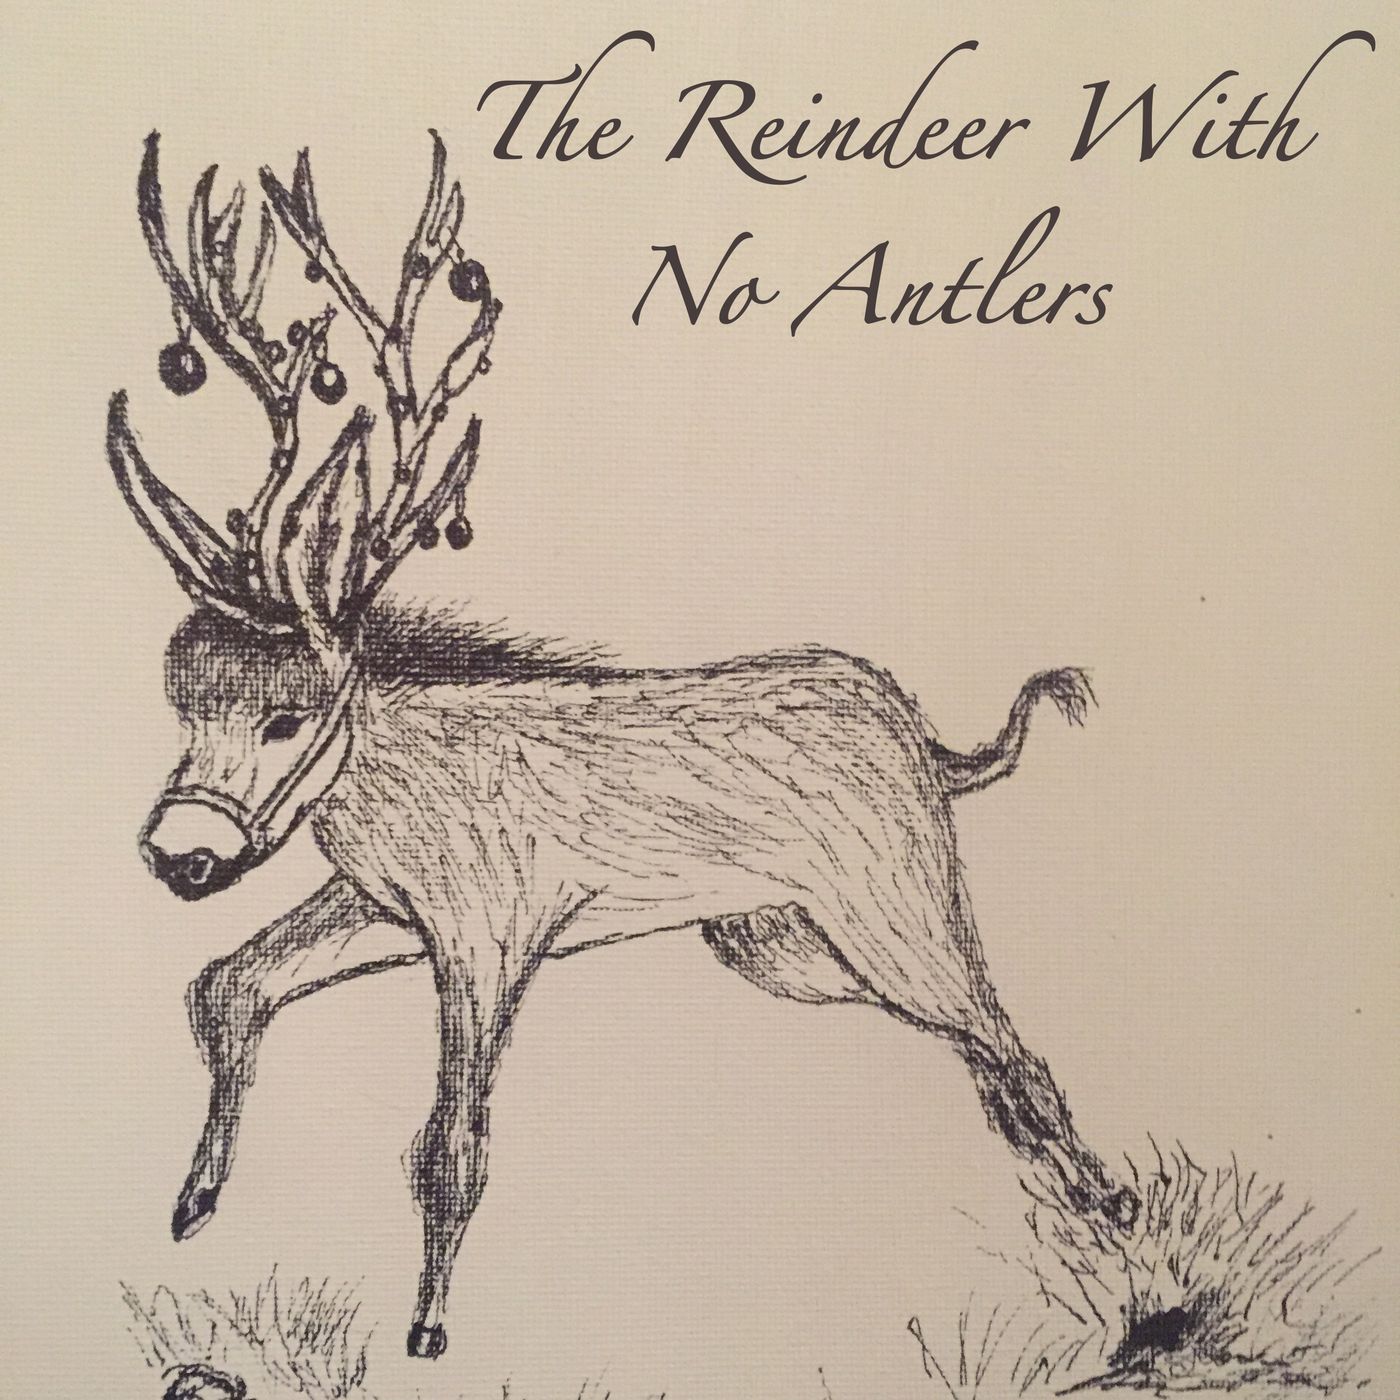 The Reindeer With No Antlers